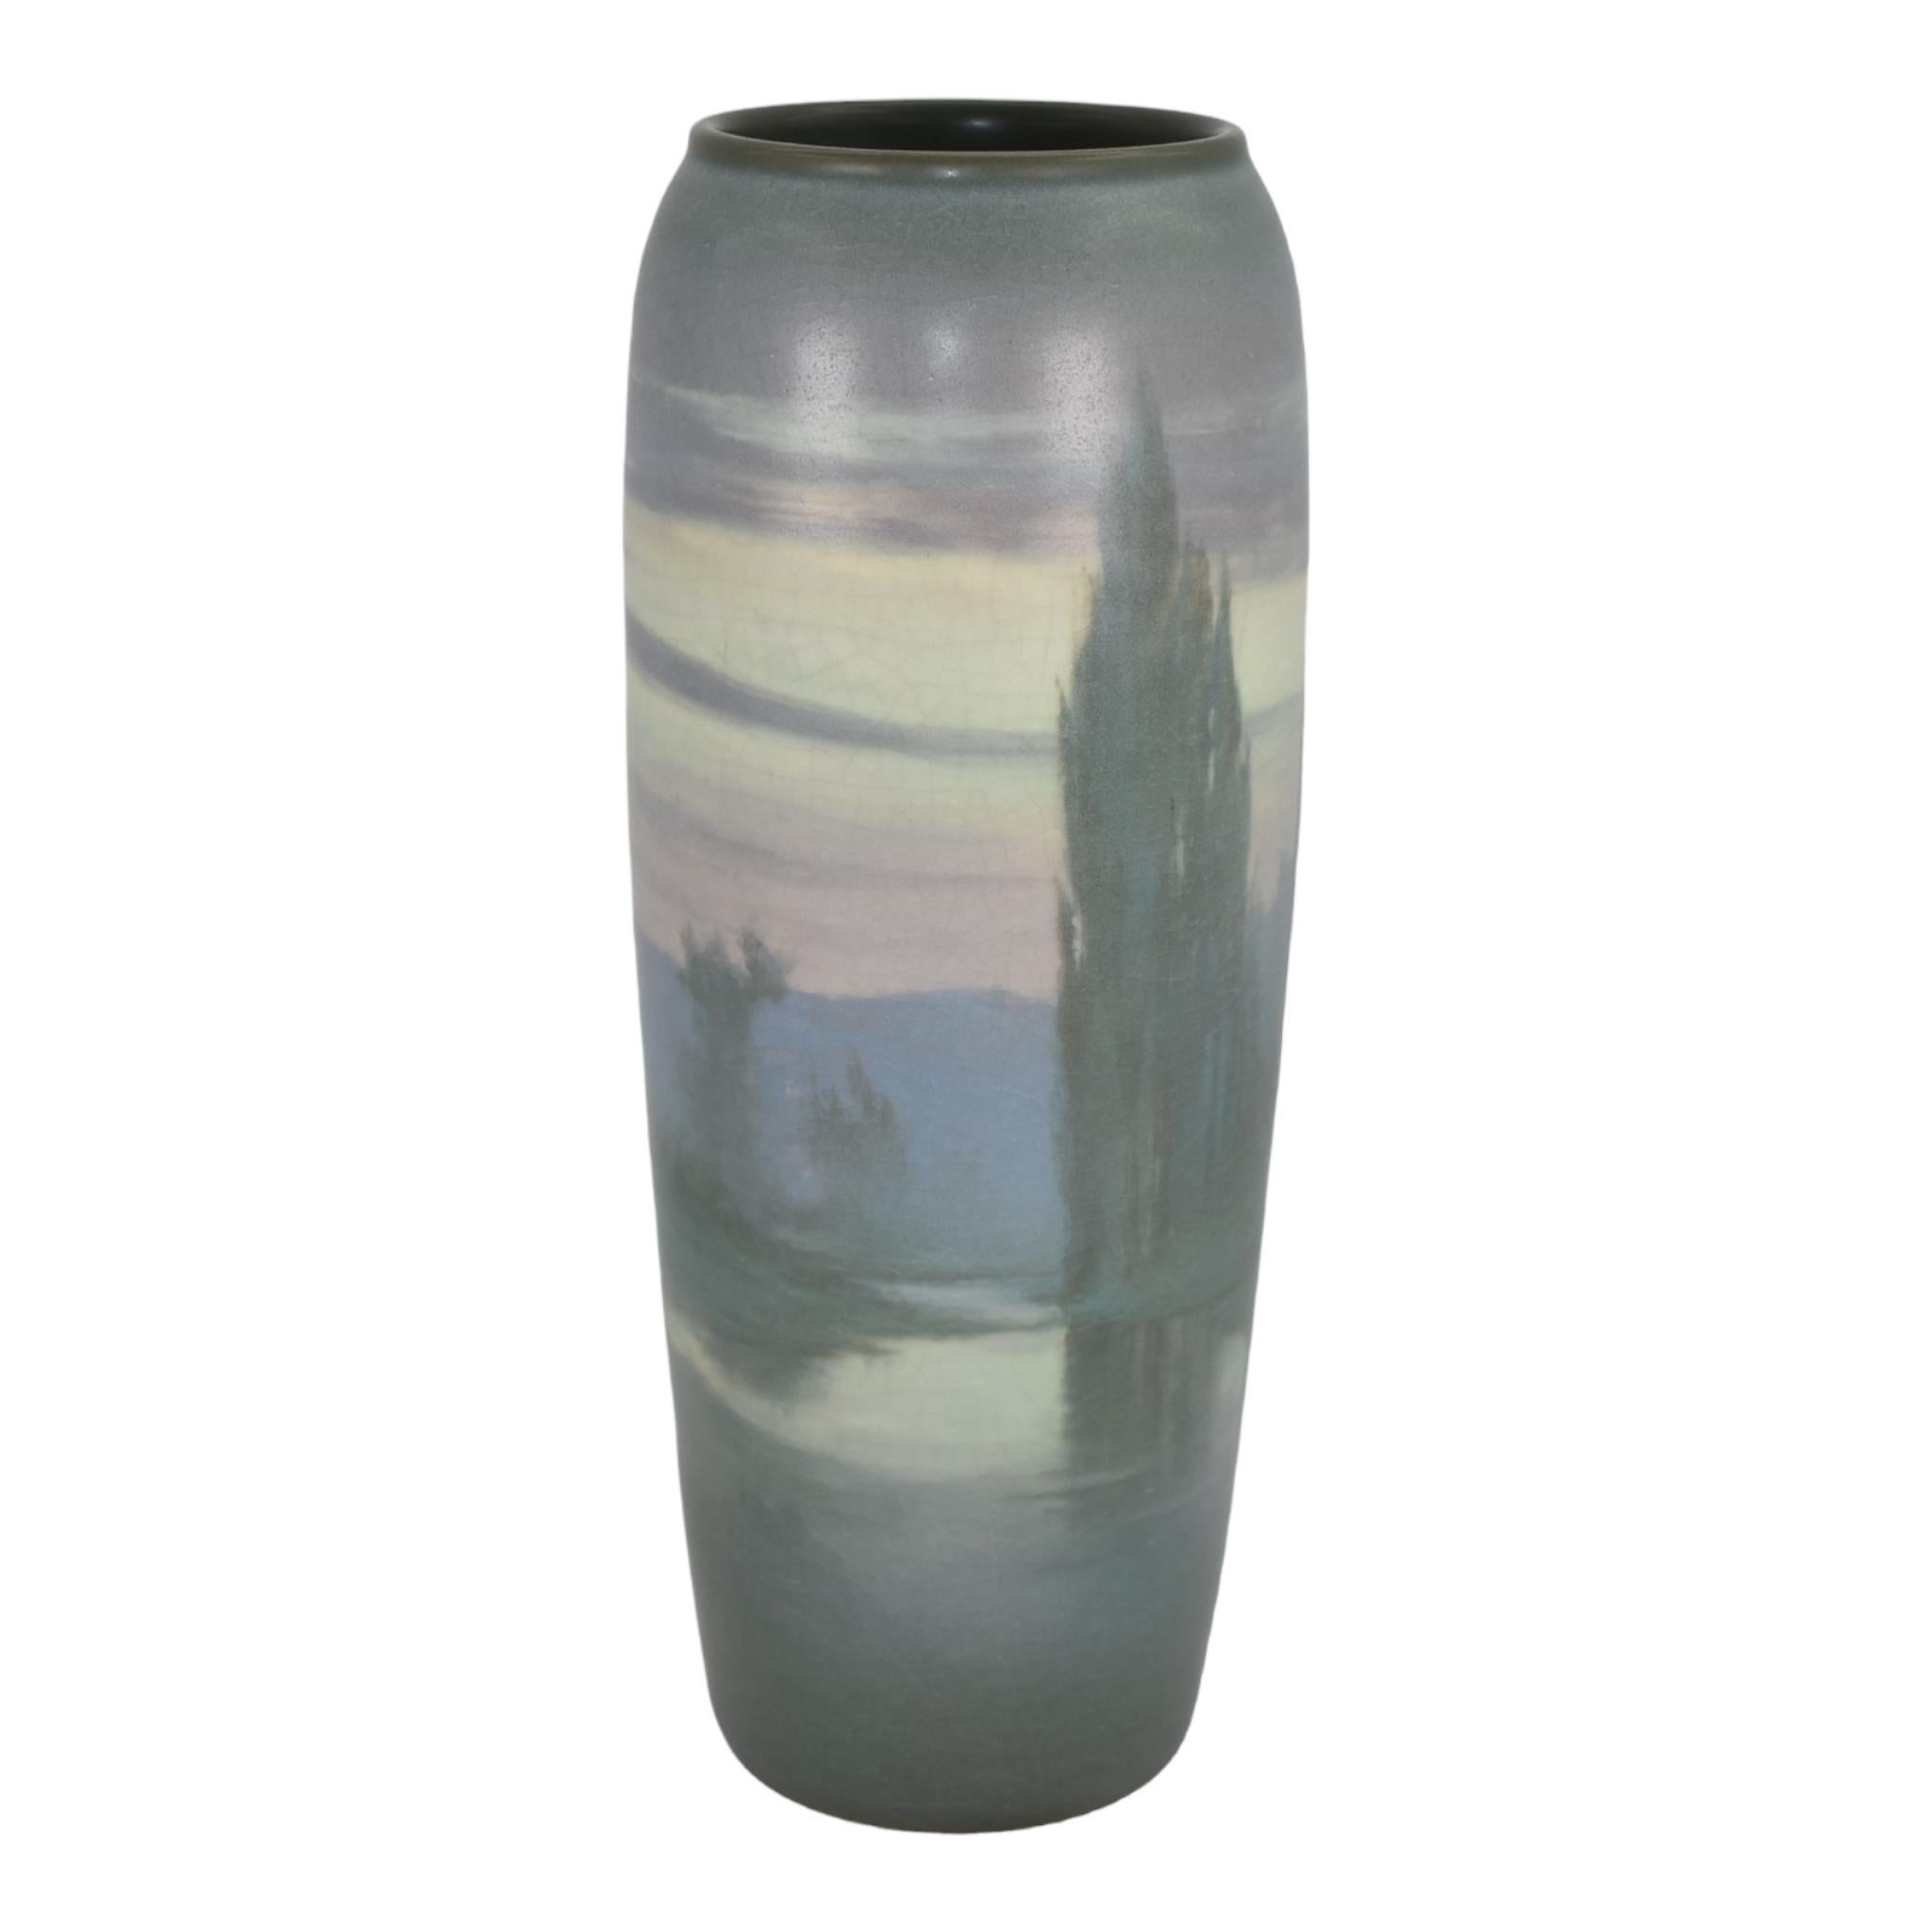 Rookwood 1911 Arts And Crafts Pottery Scenic Vellum Vase 951 Rothenbusch In Good Condition For Sale In East Peoria, IL